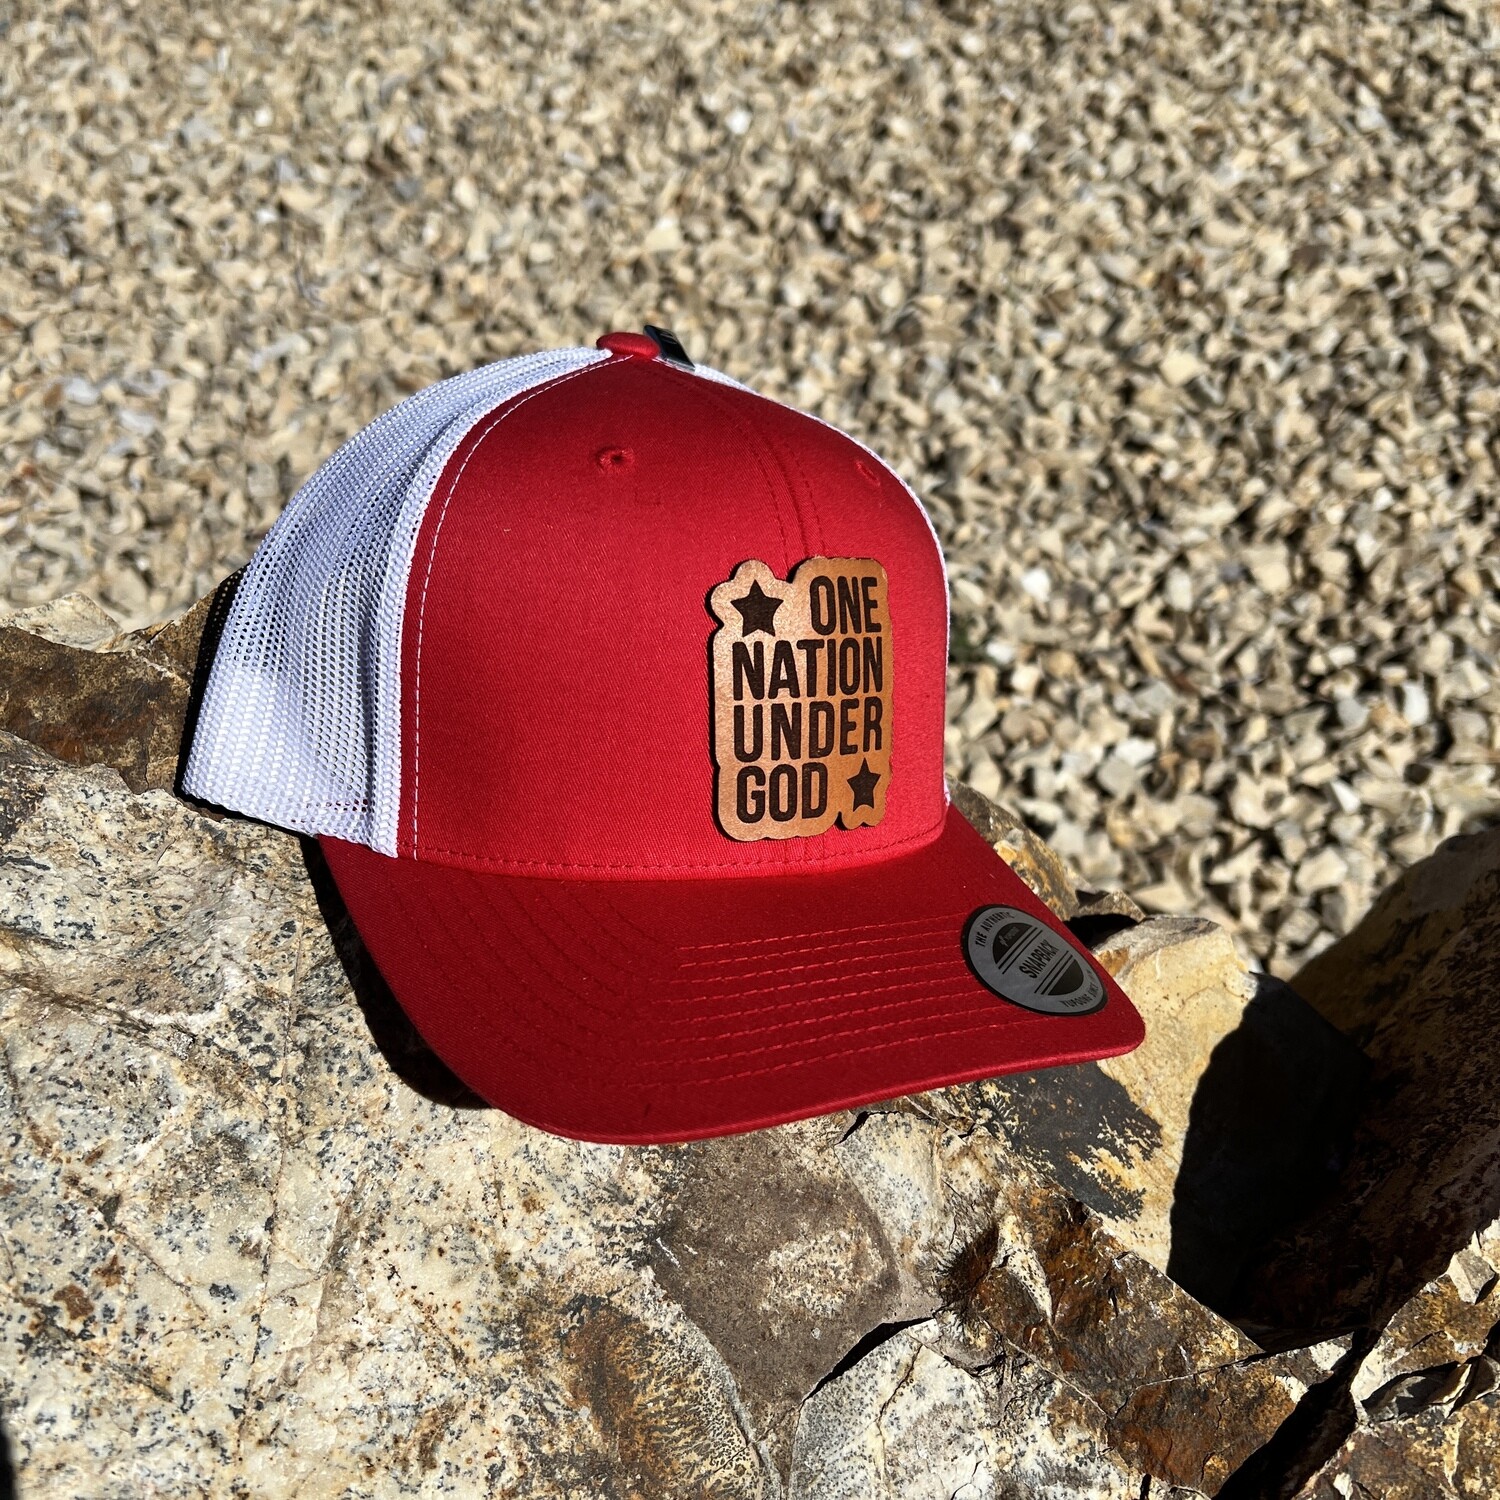 Red/White One Nation Leather Patch
Richardson SnapBack 112